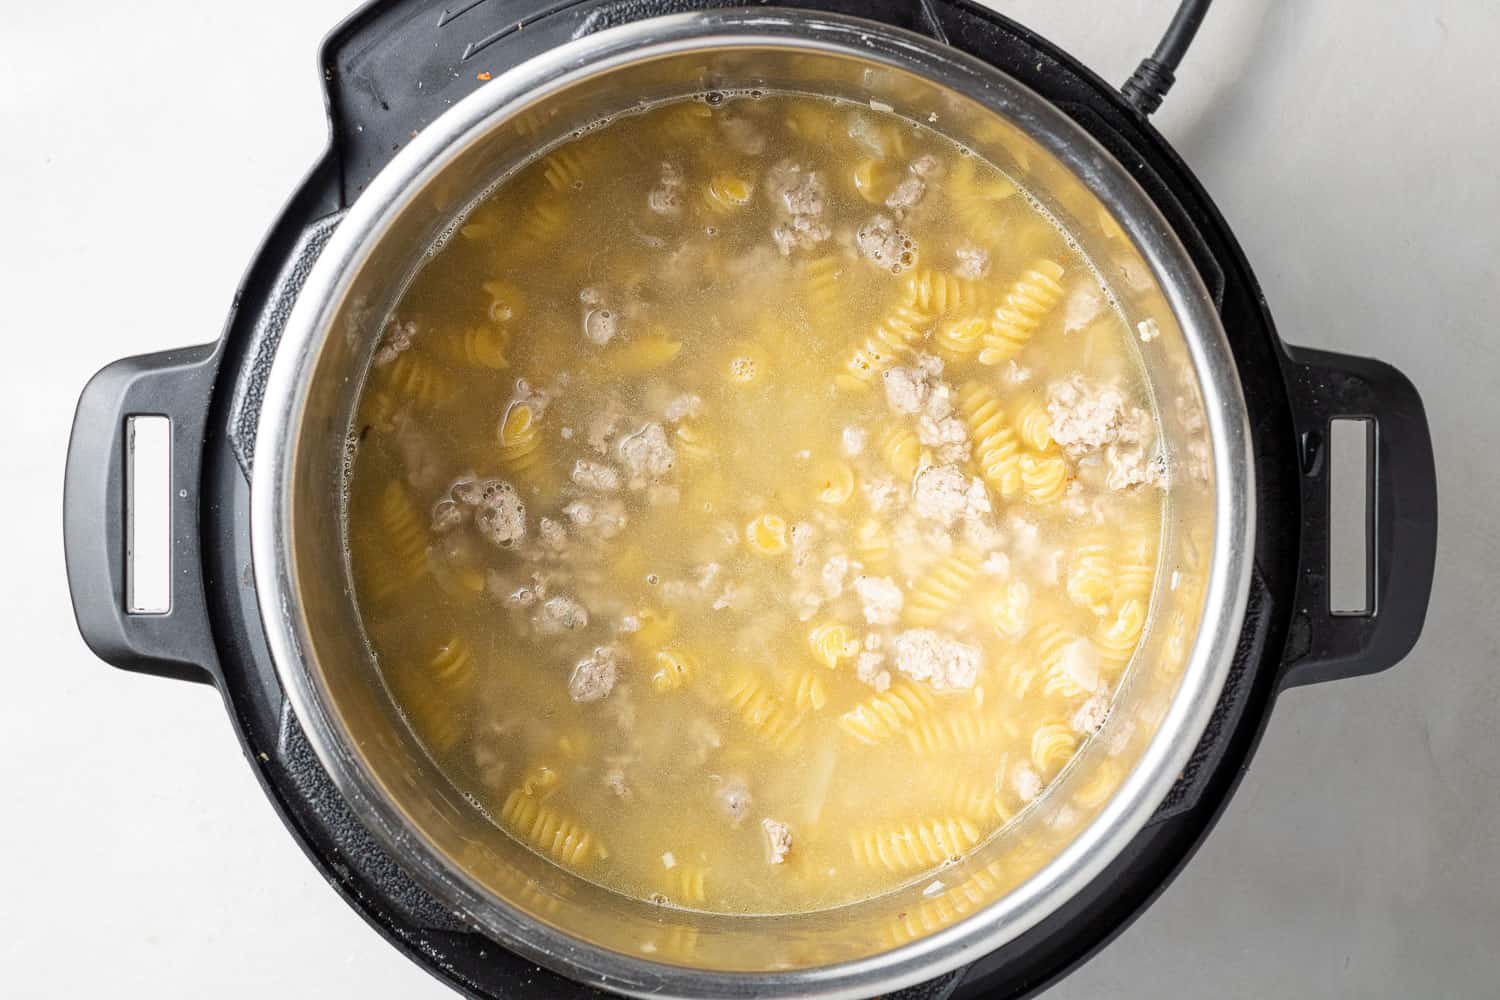 Uncooked pasta in an instant pot.